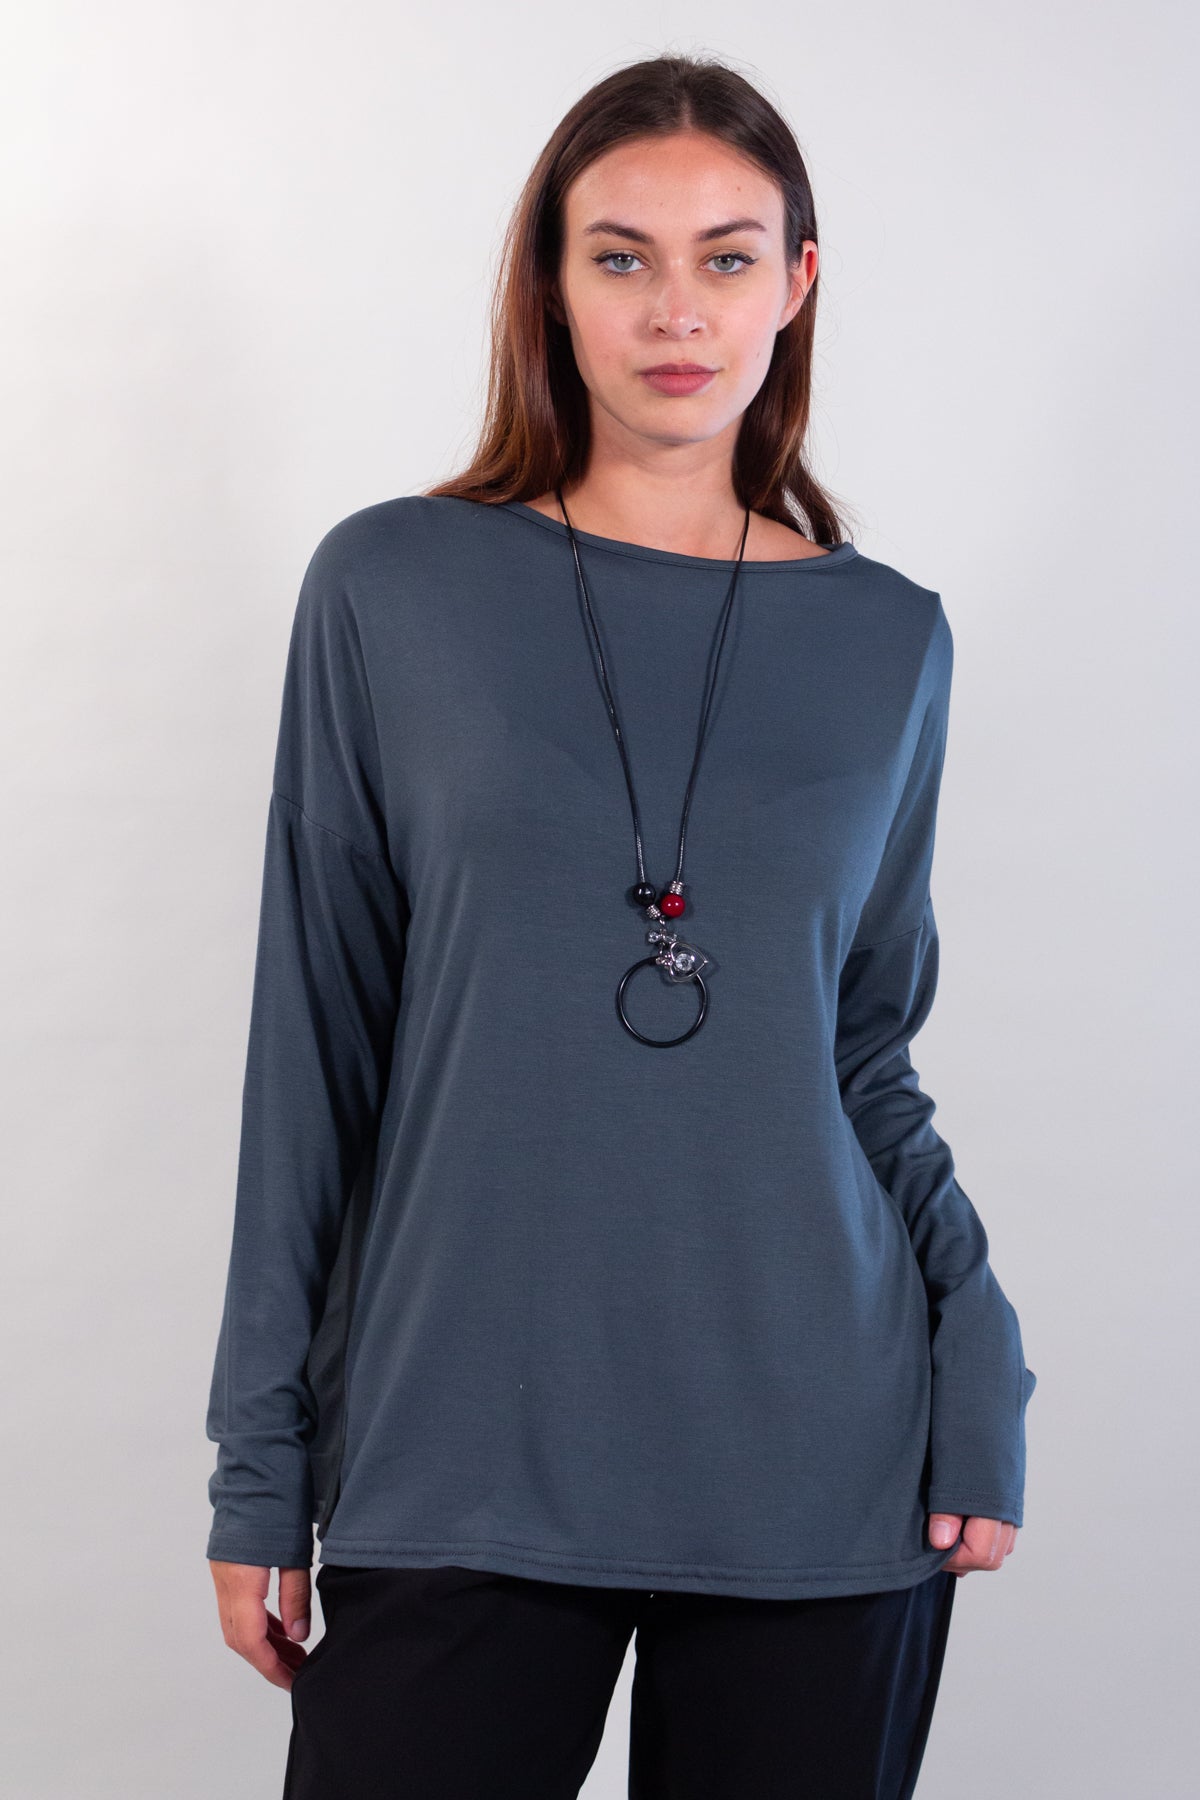 LARGE SWEATER + NECKLACE